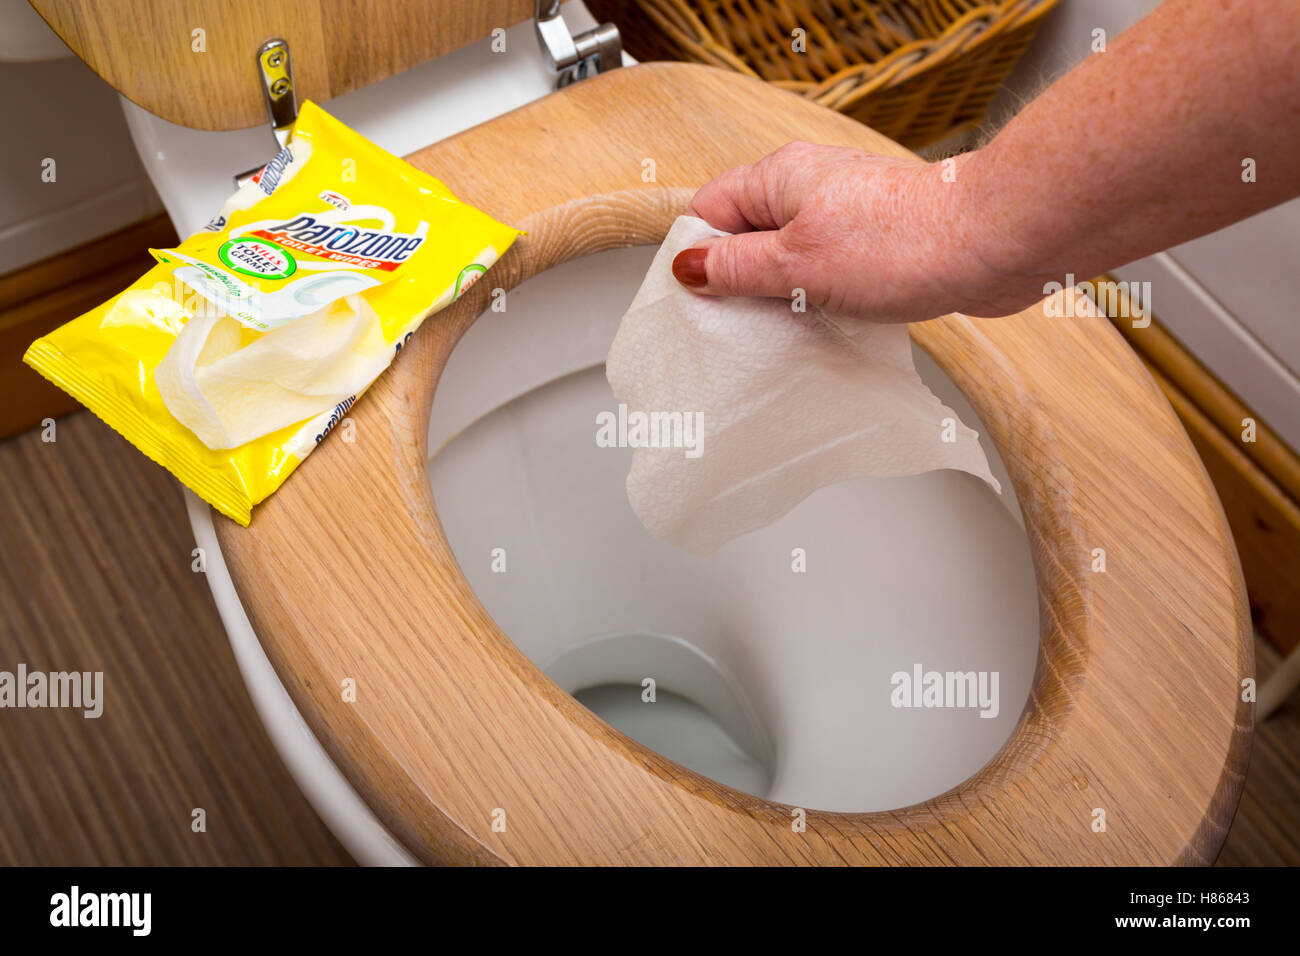 Wet Wipes used to clean the toilet before flushing them away Stock Photo